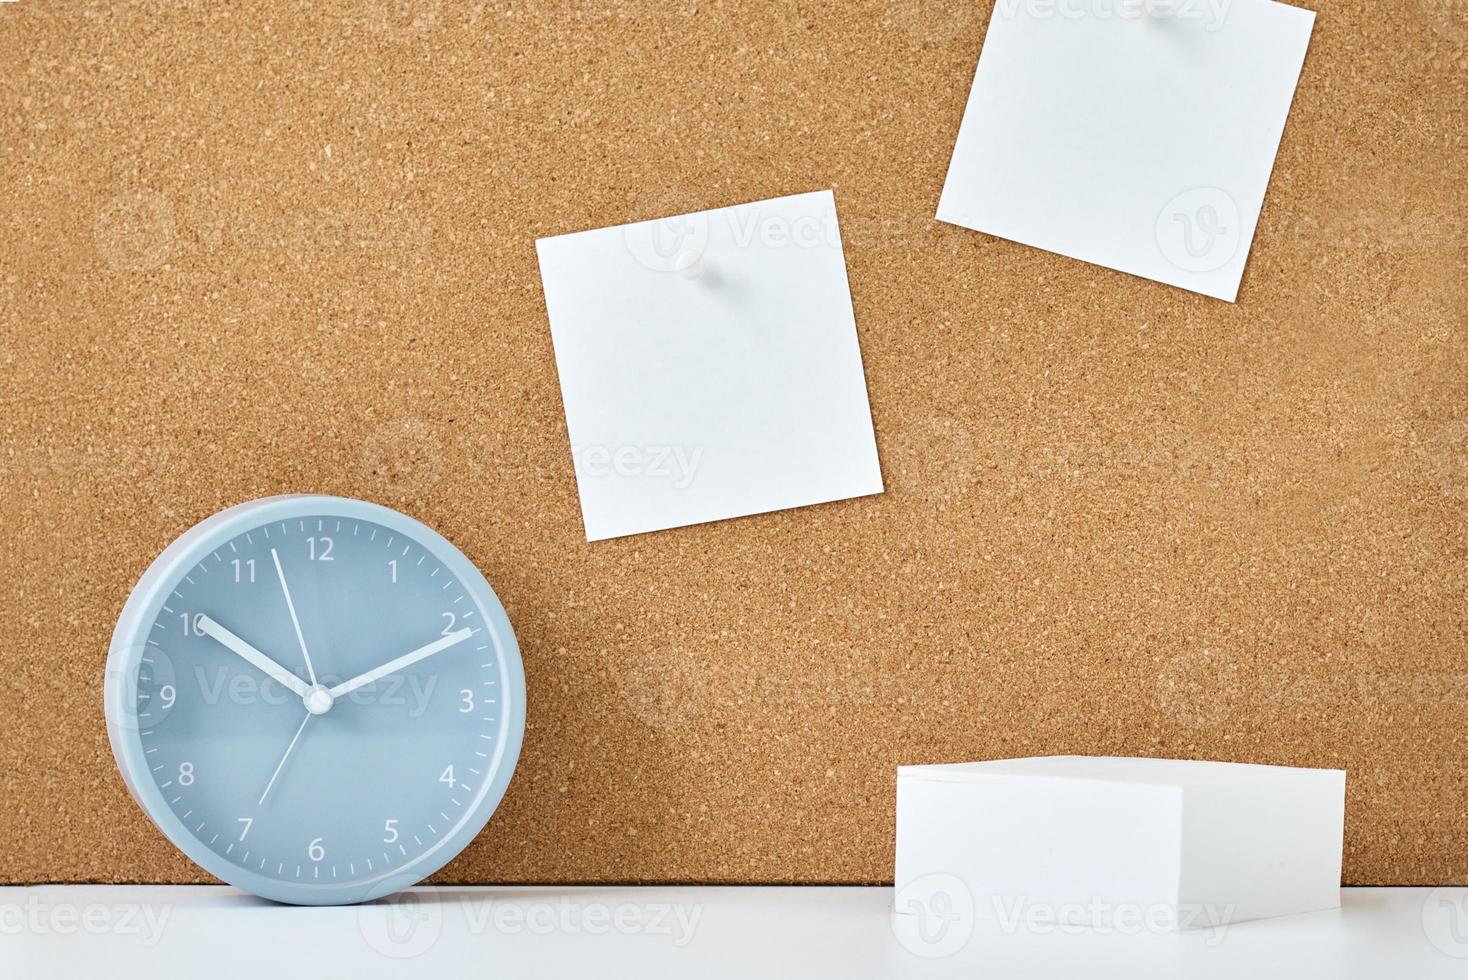 Sticky notes on a cork board and alarm clock in workplace office or home photo